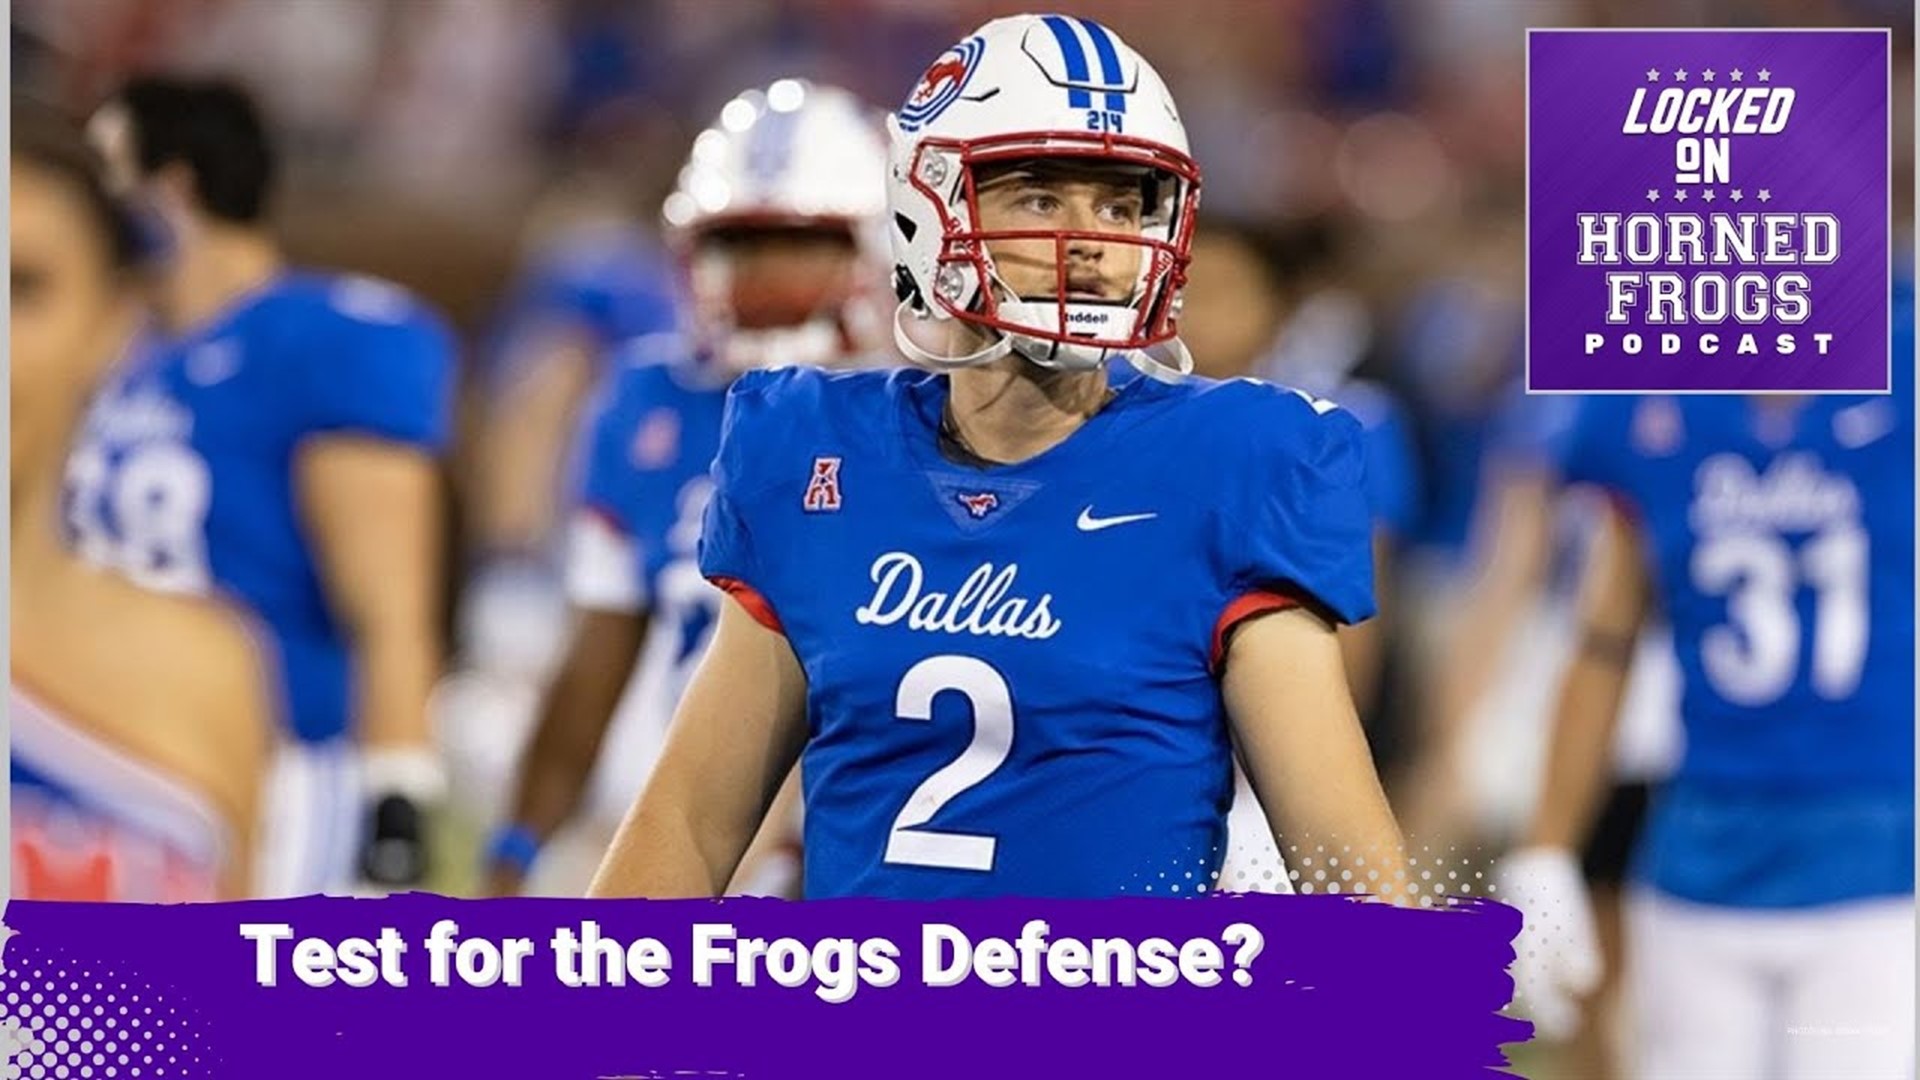 The TCU defense has been improved lately. I tell you why this week will be a huge test for them.